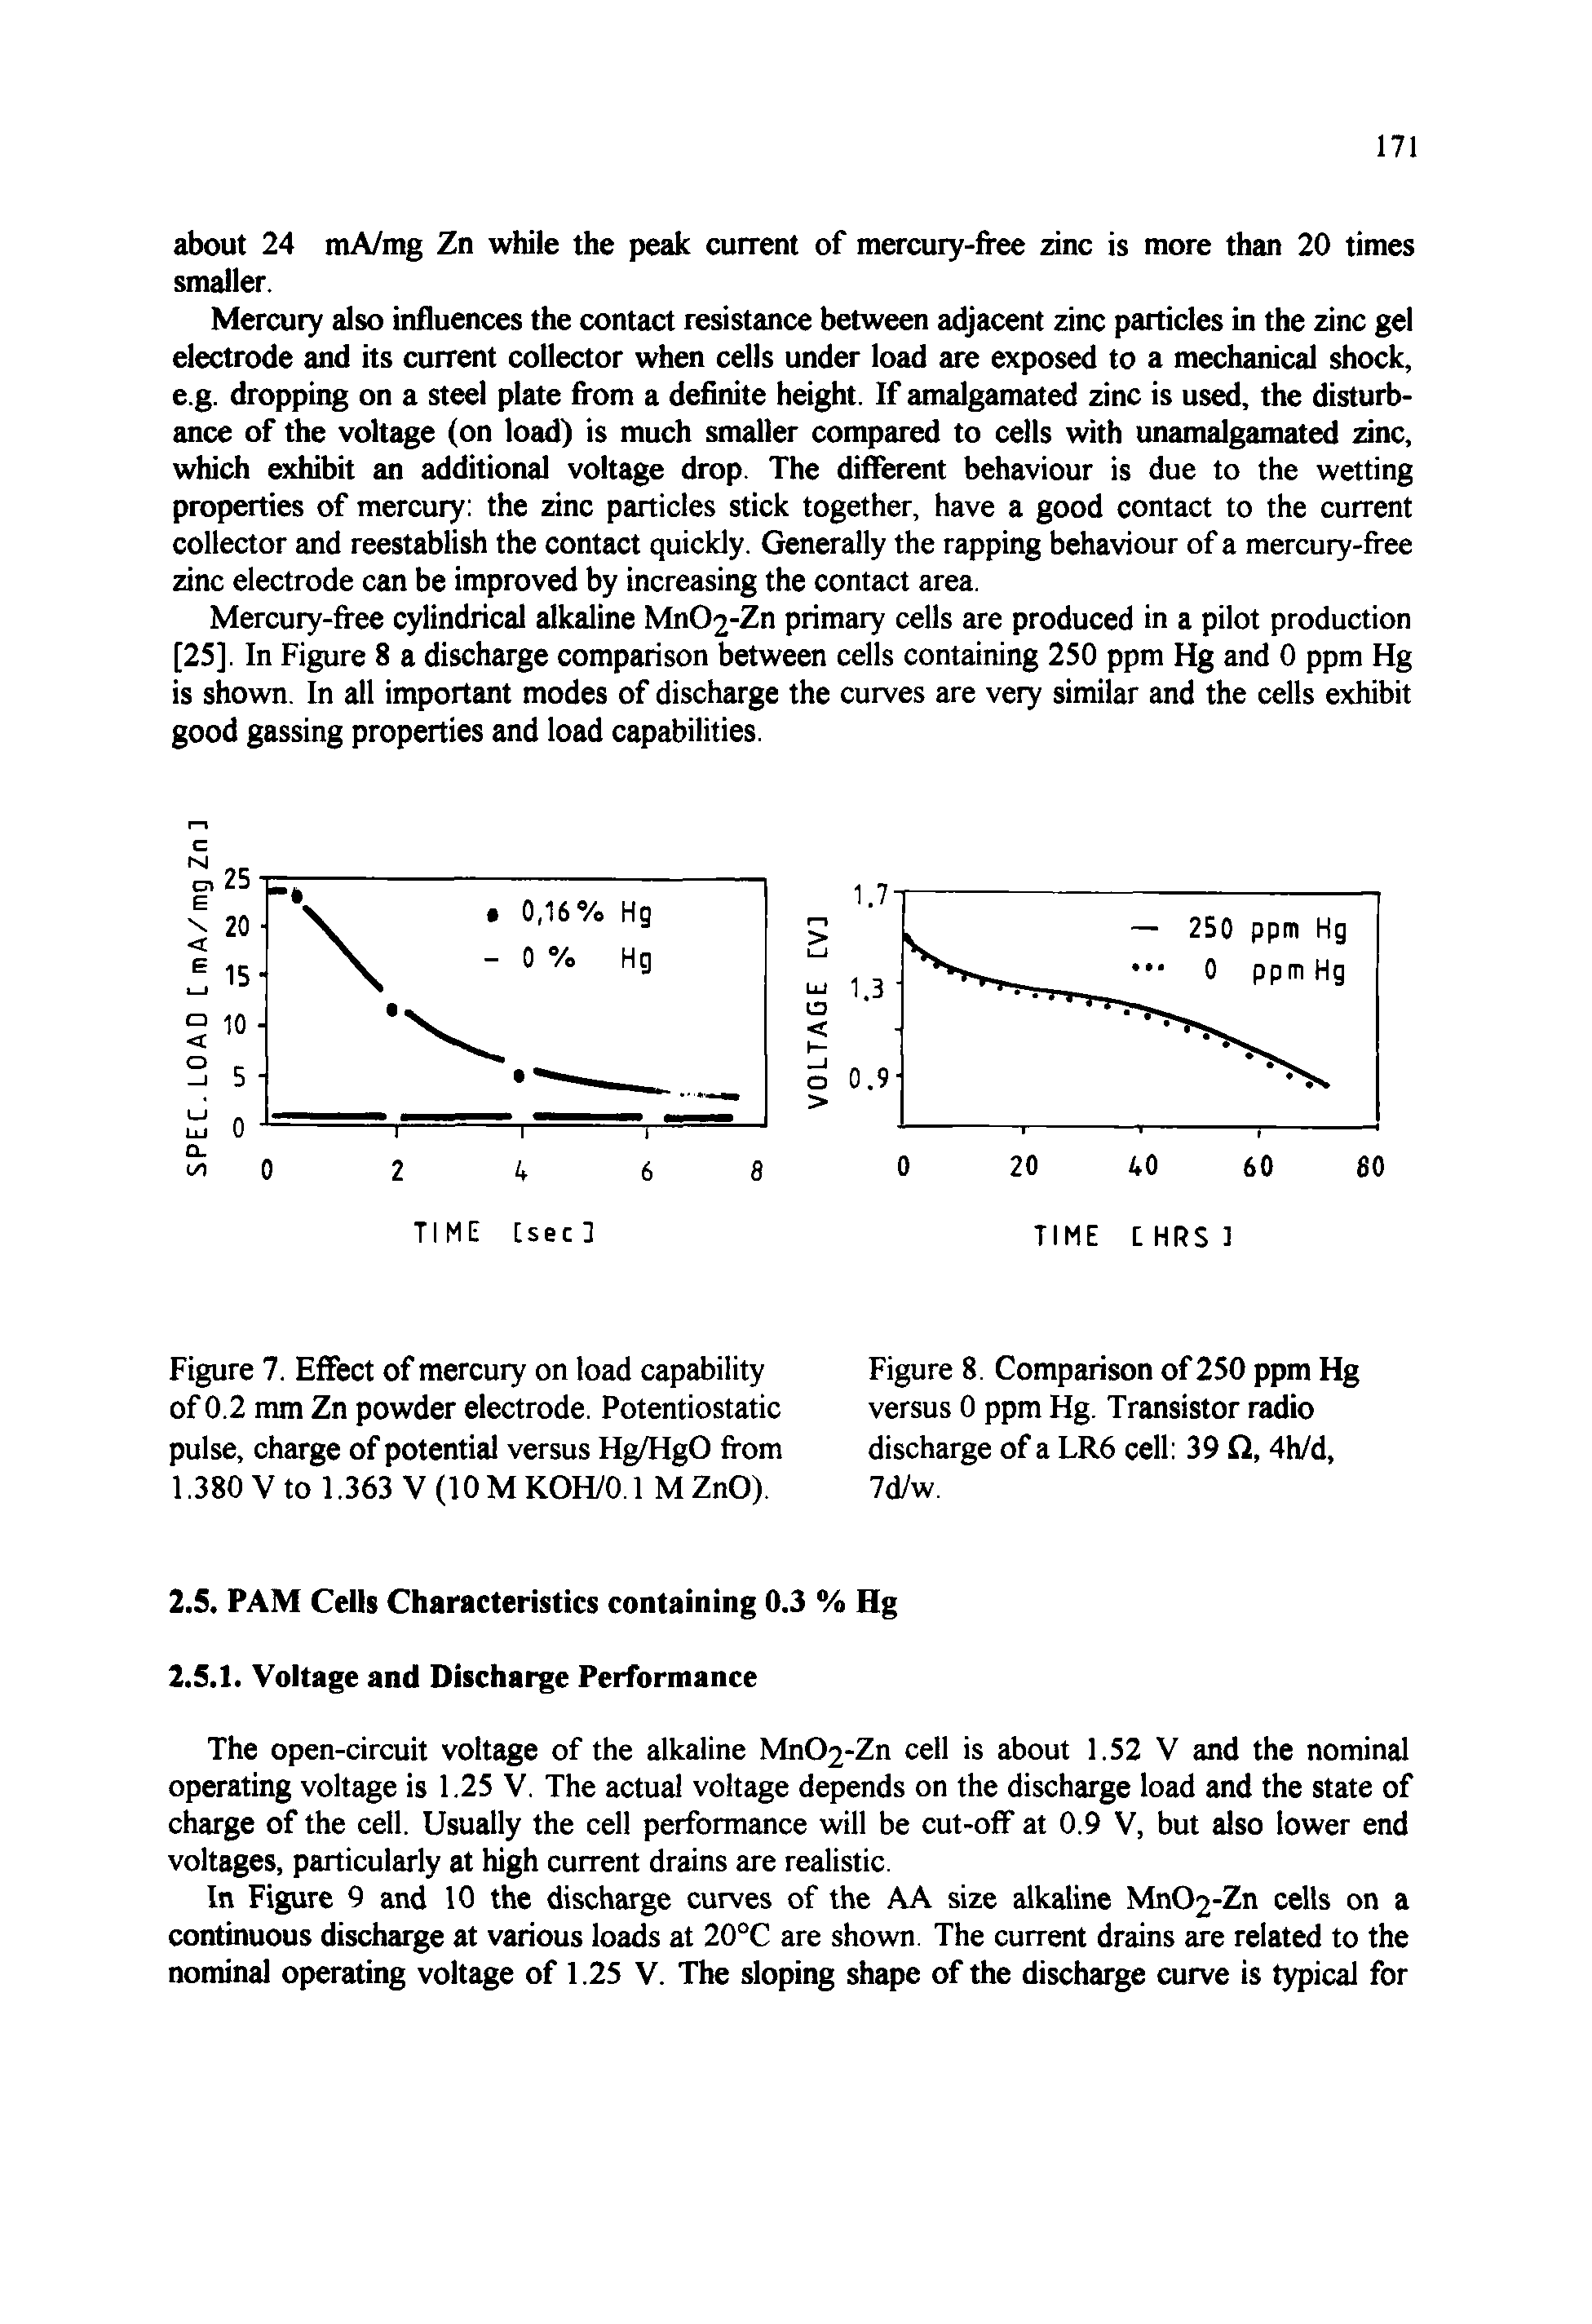 Figure 7. Effect of mercury on load capability of 0.2 mm Zn powder electrode. Potentiostatic pulse, charge of potential versus Hg/HgO from 1.380 V to 1.363 V (10 M KOH/0.1 M ZnO).